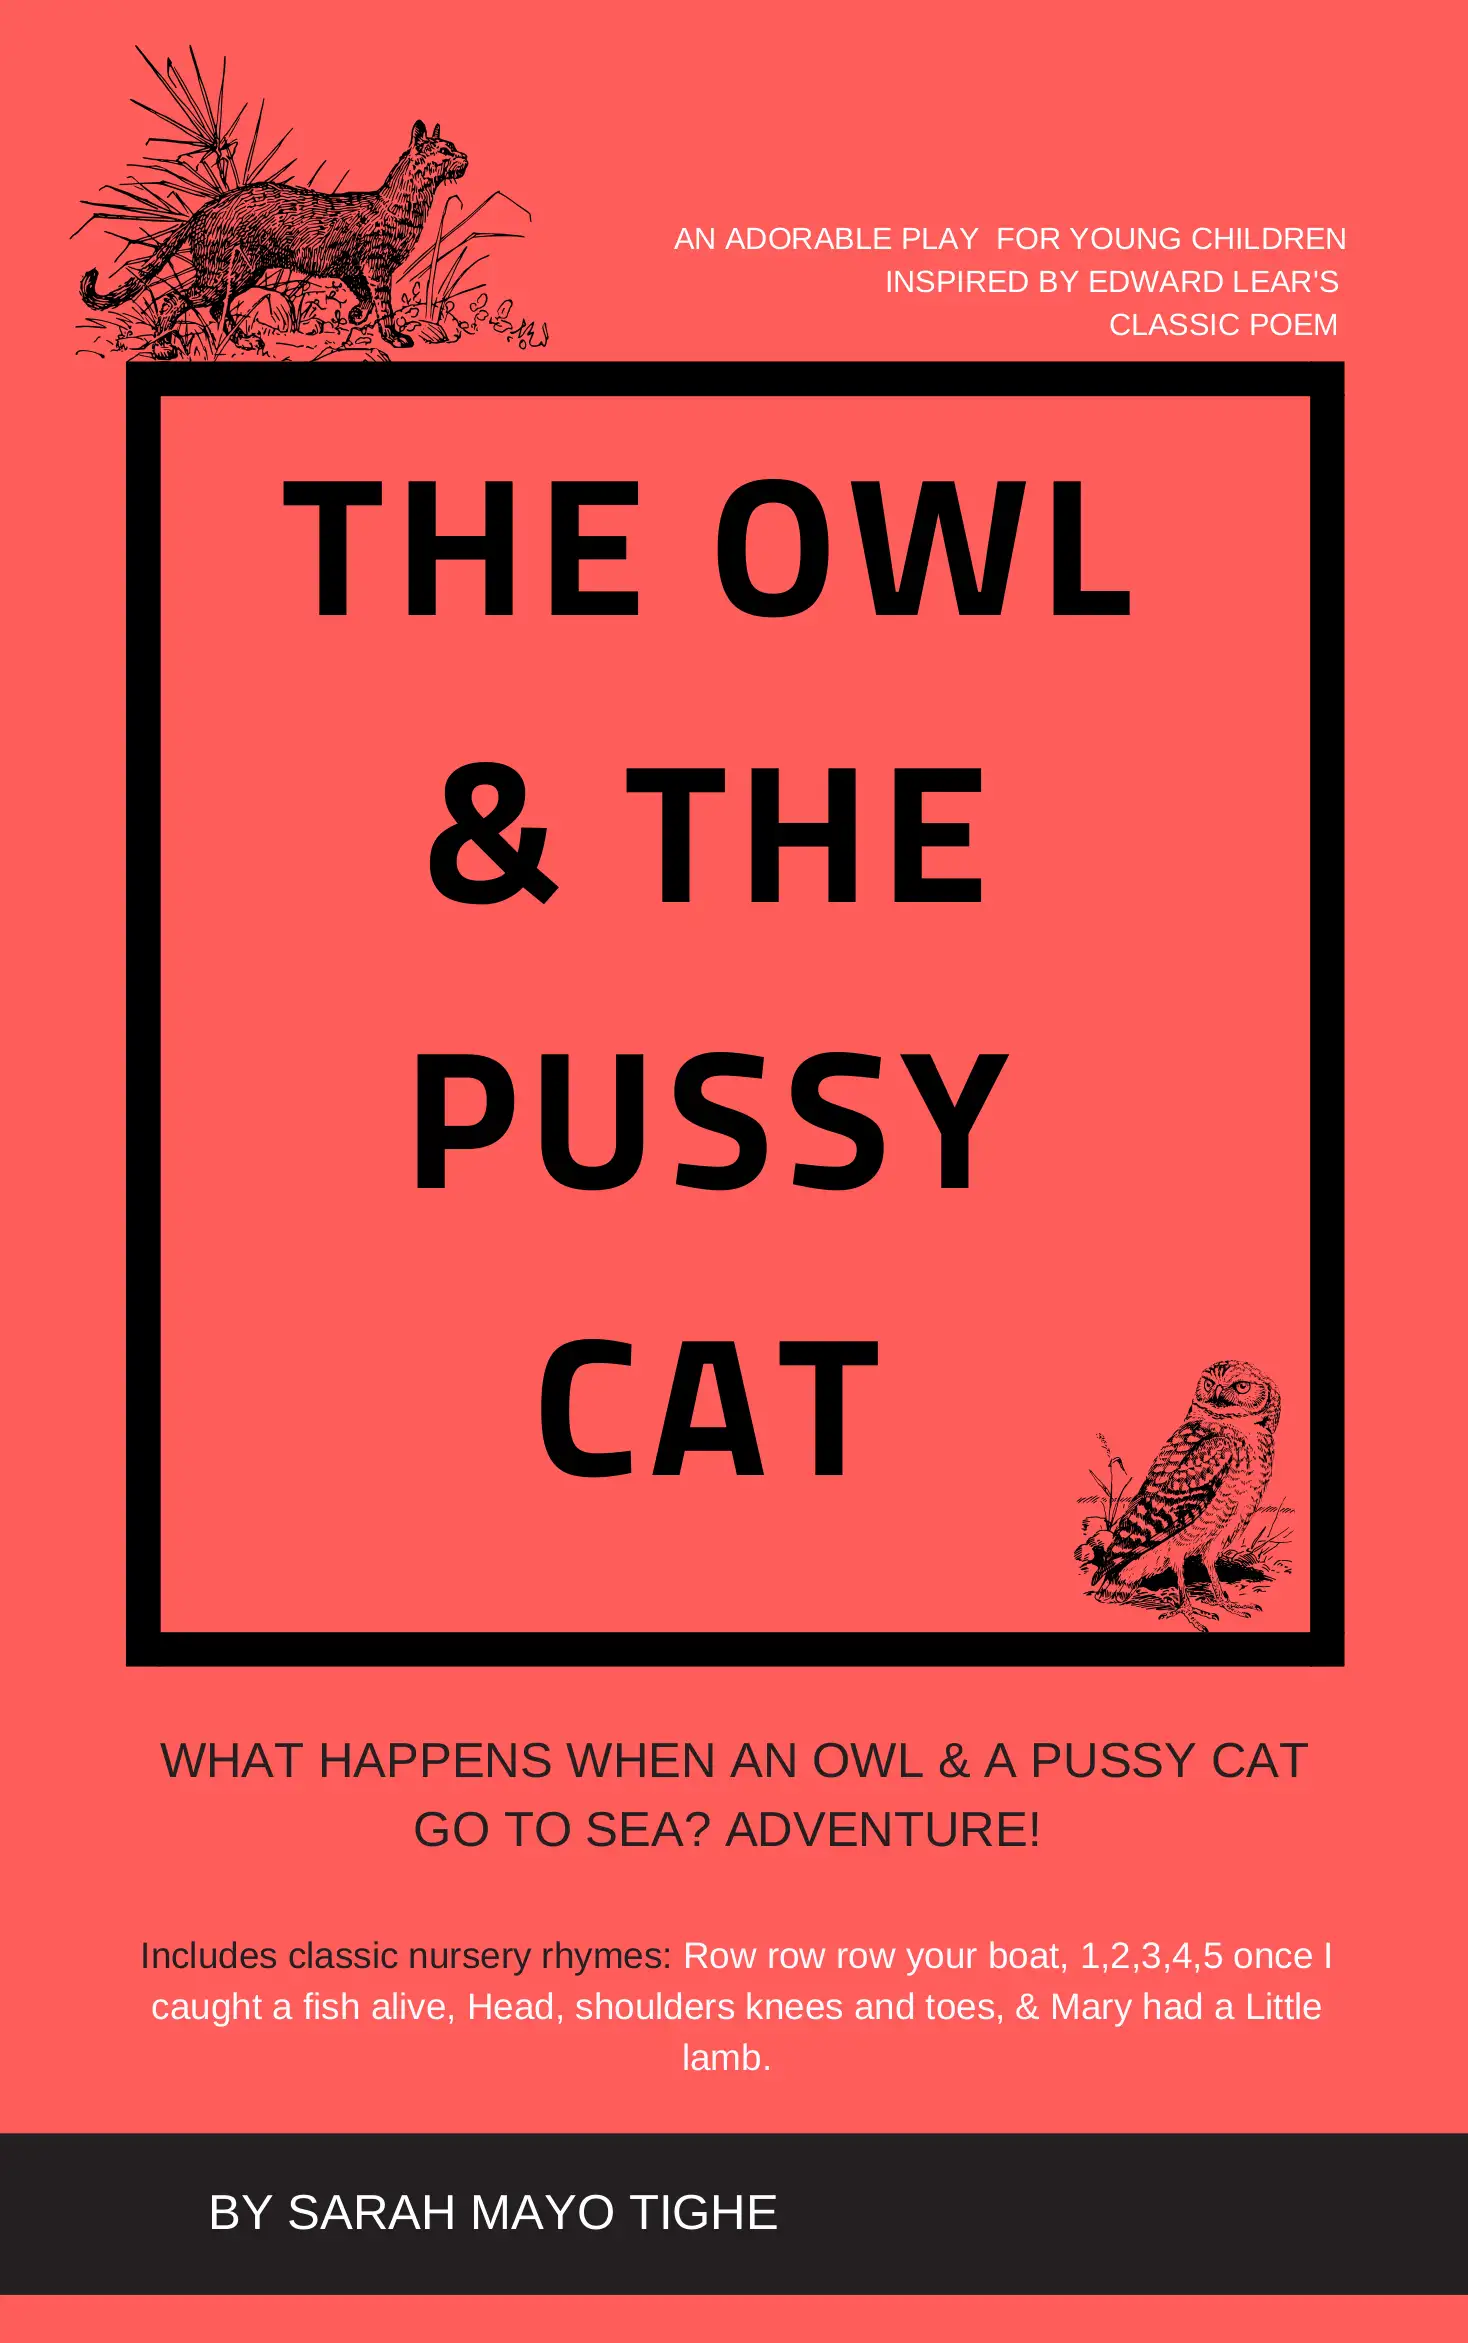 The Owl and the Pussycat - Play for Young Children aged 2 to 6